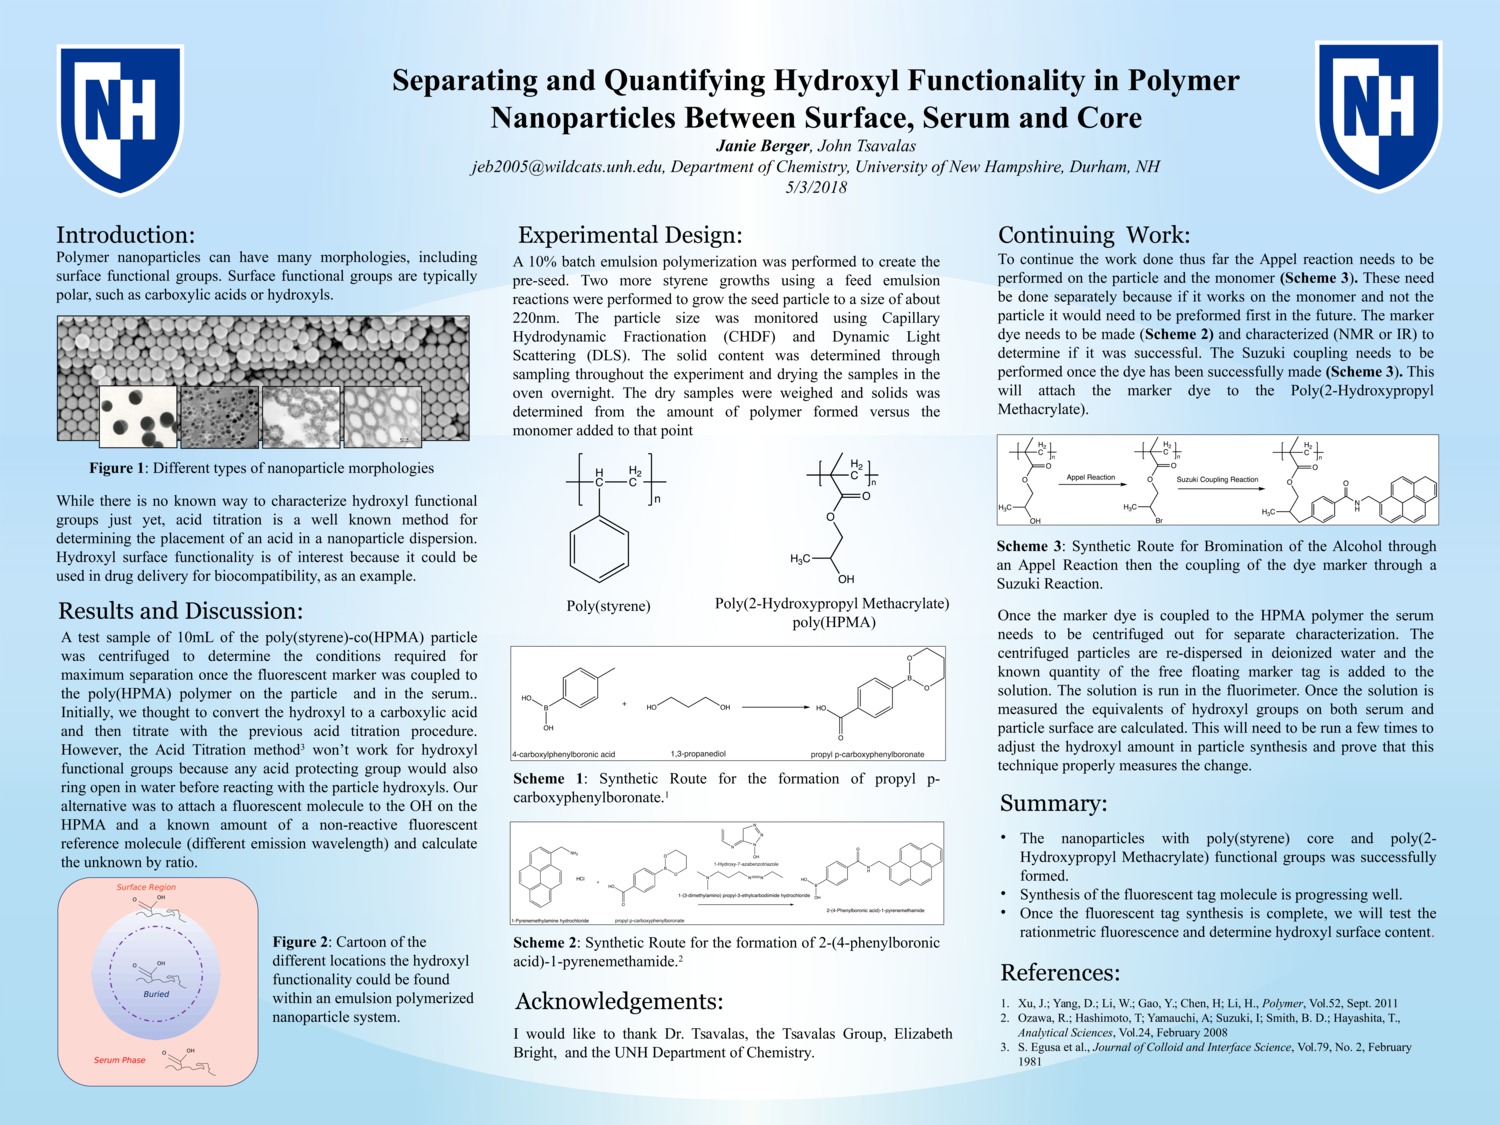 Separating And Quantifying Hydroxyl Functionality In Polymer Nanoparticles Between Surface, Serum And Core by jeb2005